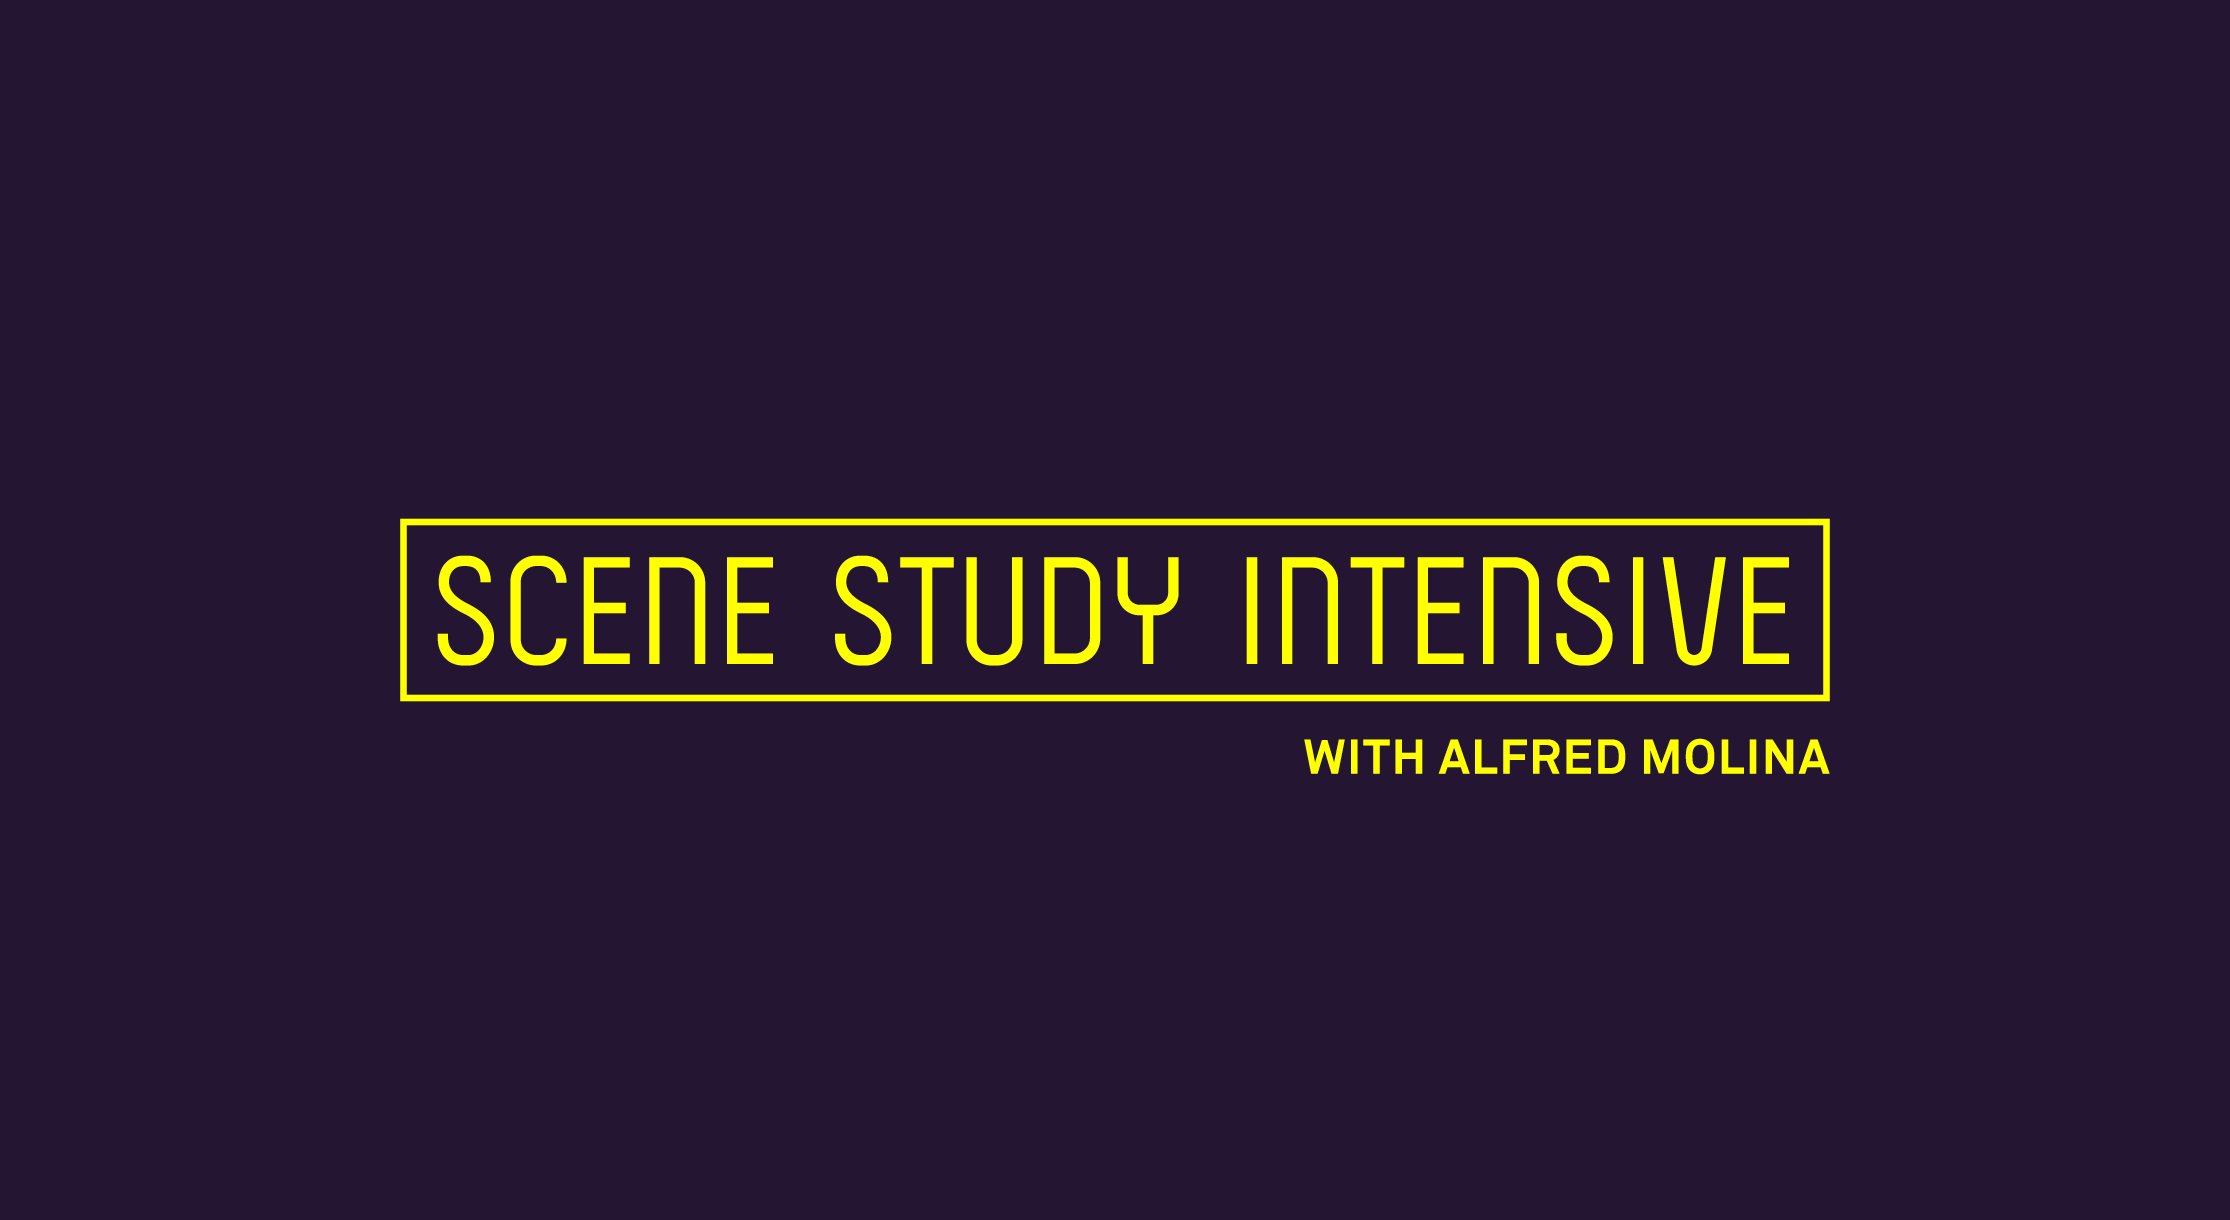 Scene Study Intensive with Alfred Molina